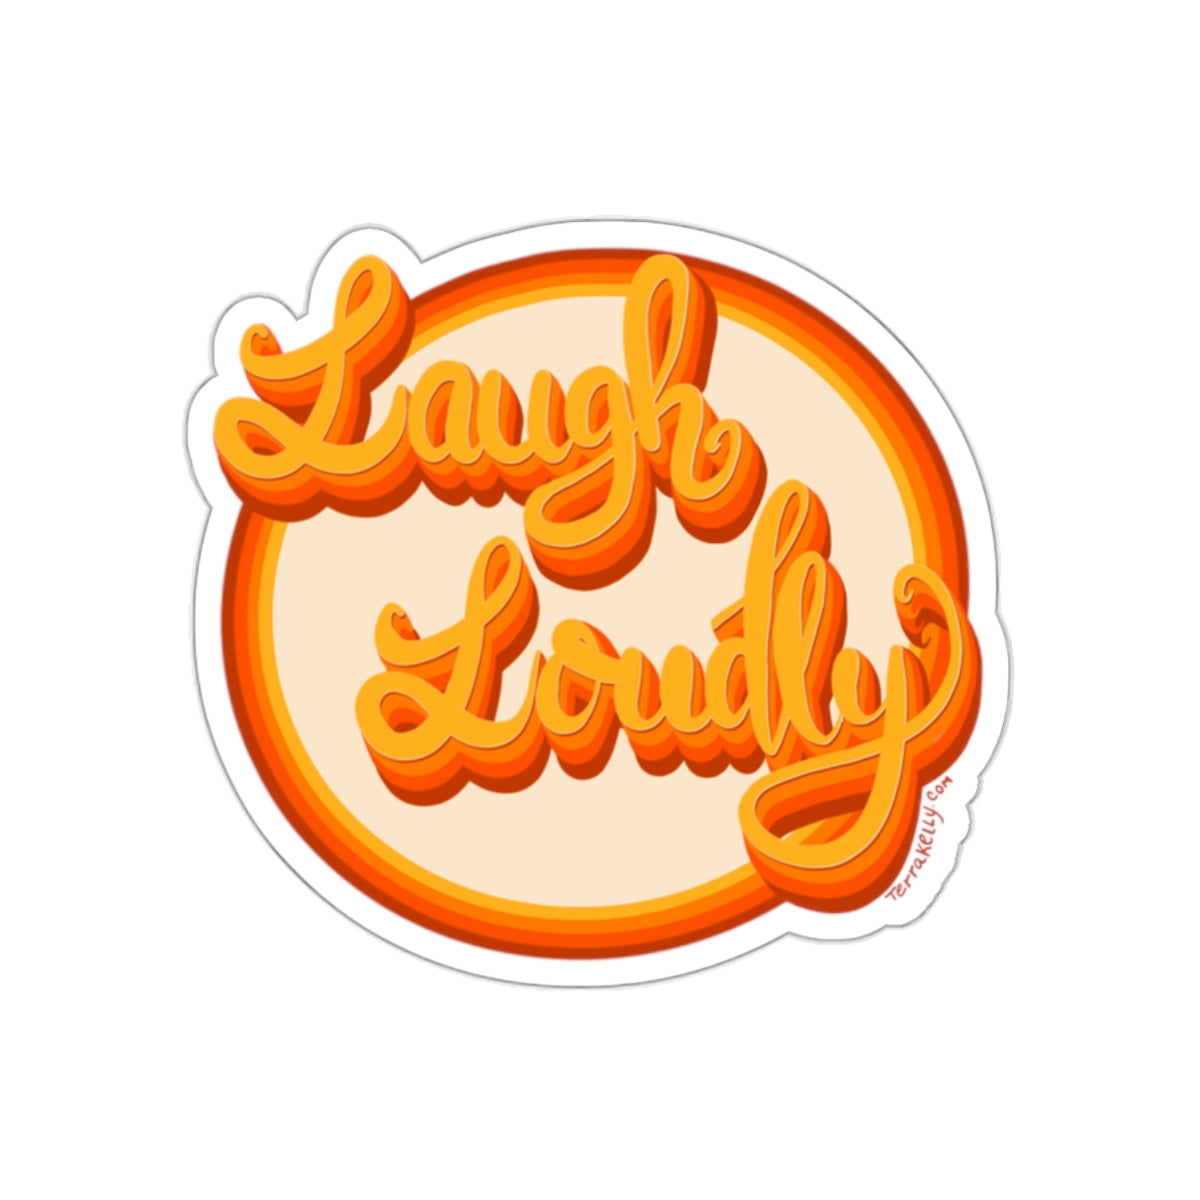 Laugh Loudly Kiss-Cut Stickers | Computer Sticker | Transparent Sticker | FREE SHIPPING